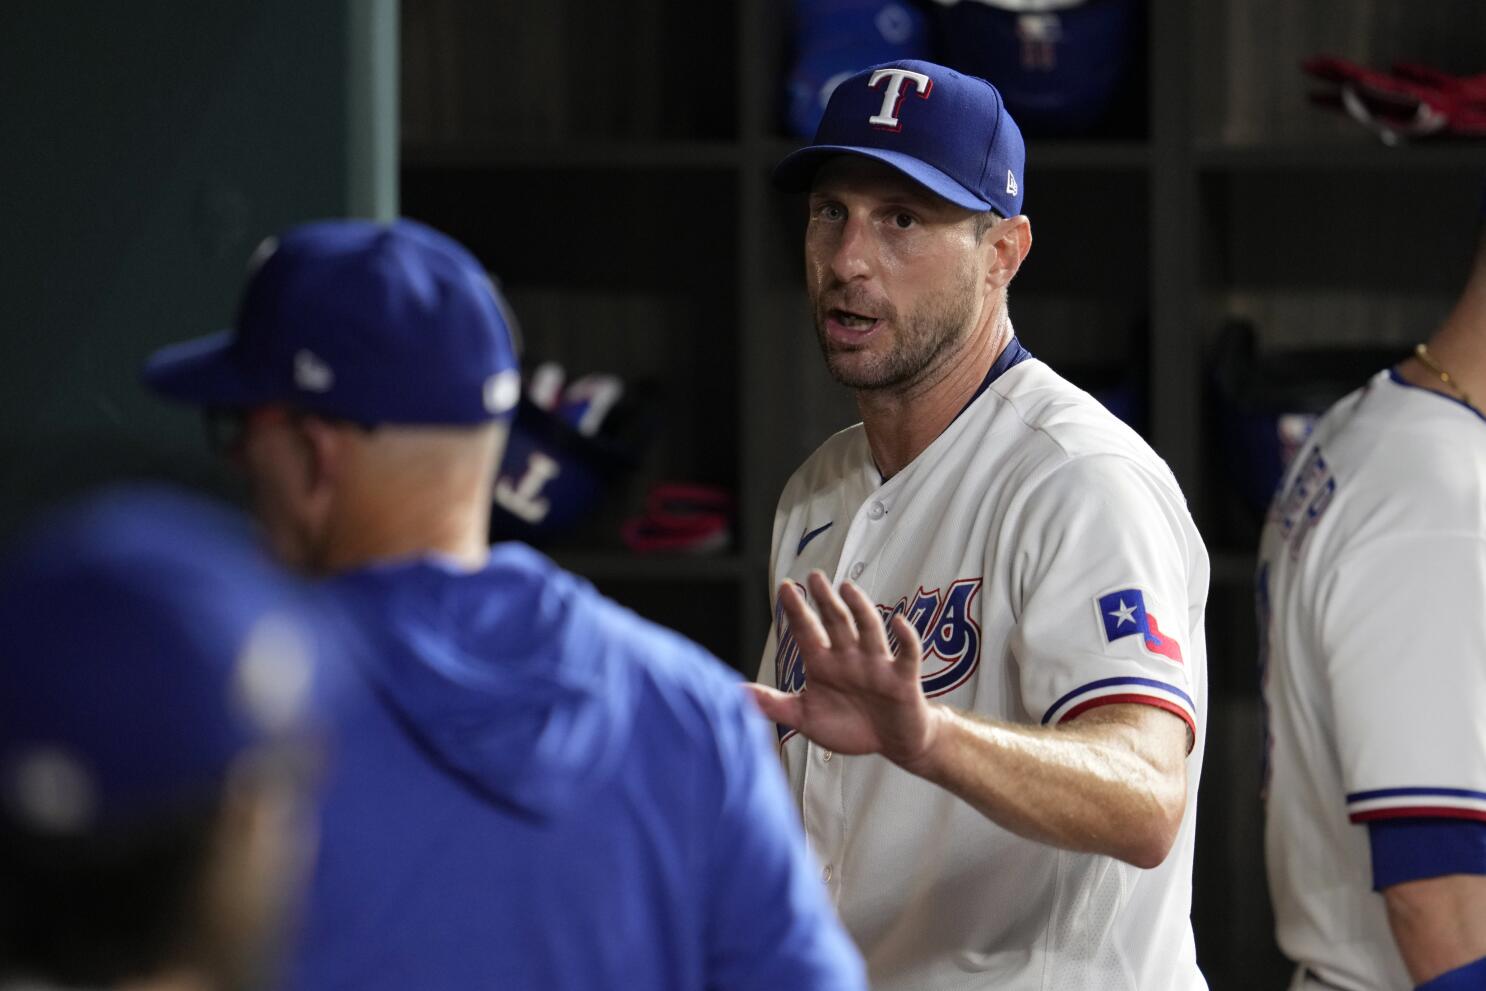 Scherzer roughed up by Astros in return from injury, leaving with Rangers  down 5 in loss, Sports